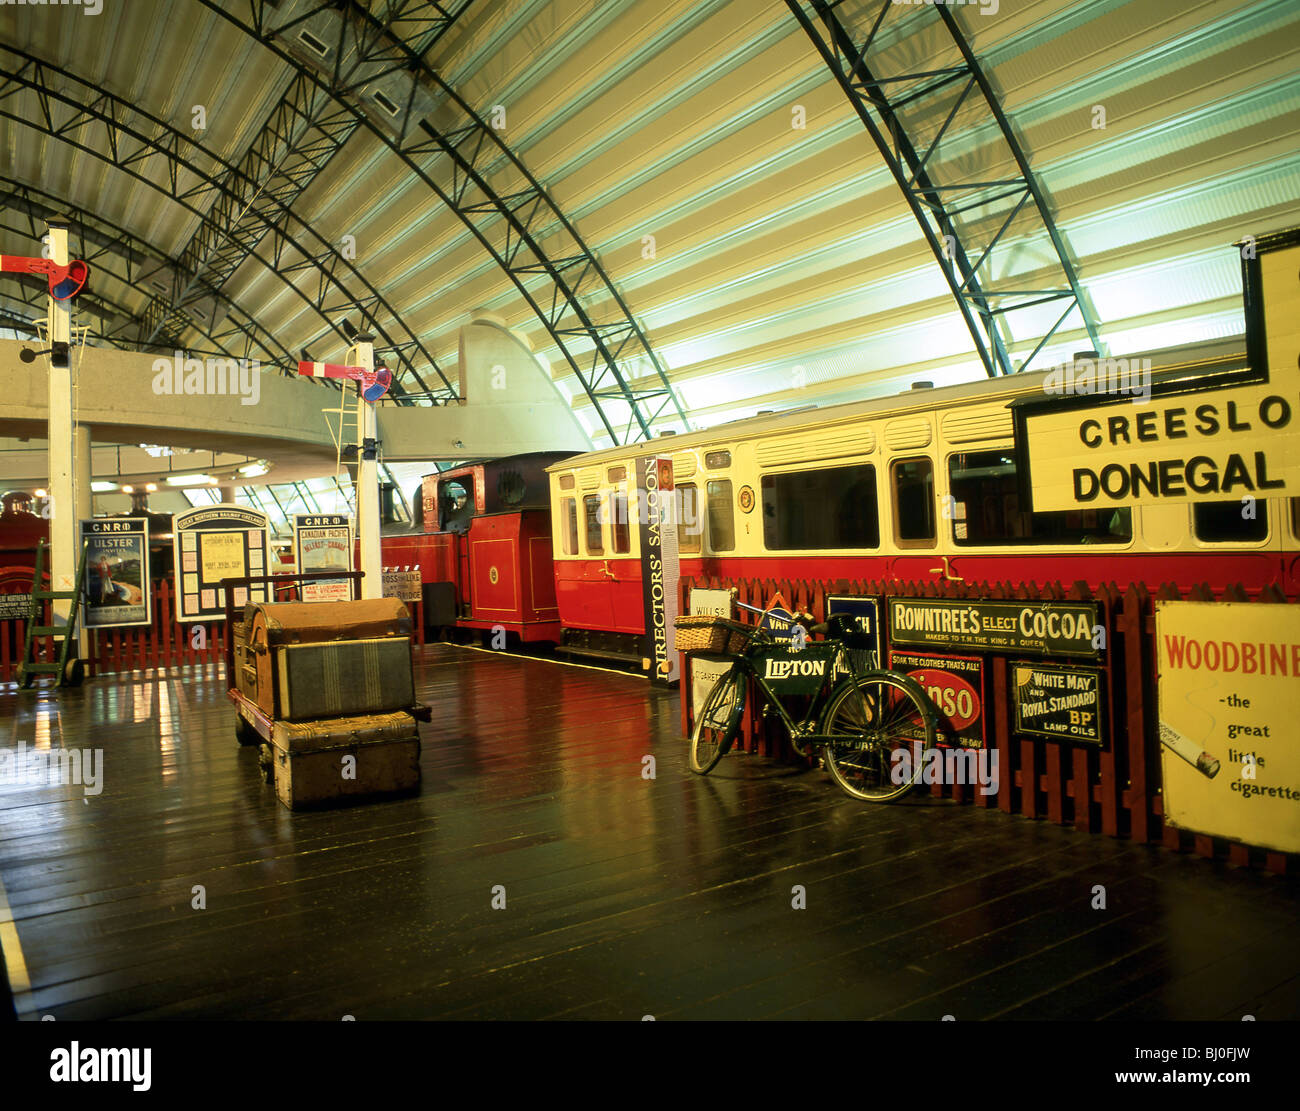 Railway collection, Ulster Folk & Transport Museum, County Down, Northern Ireland, United Kingdom Stock Photo